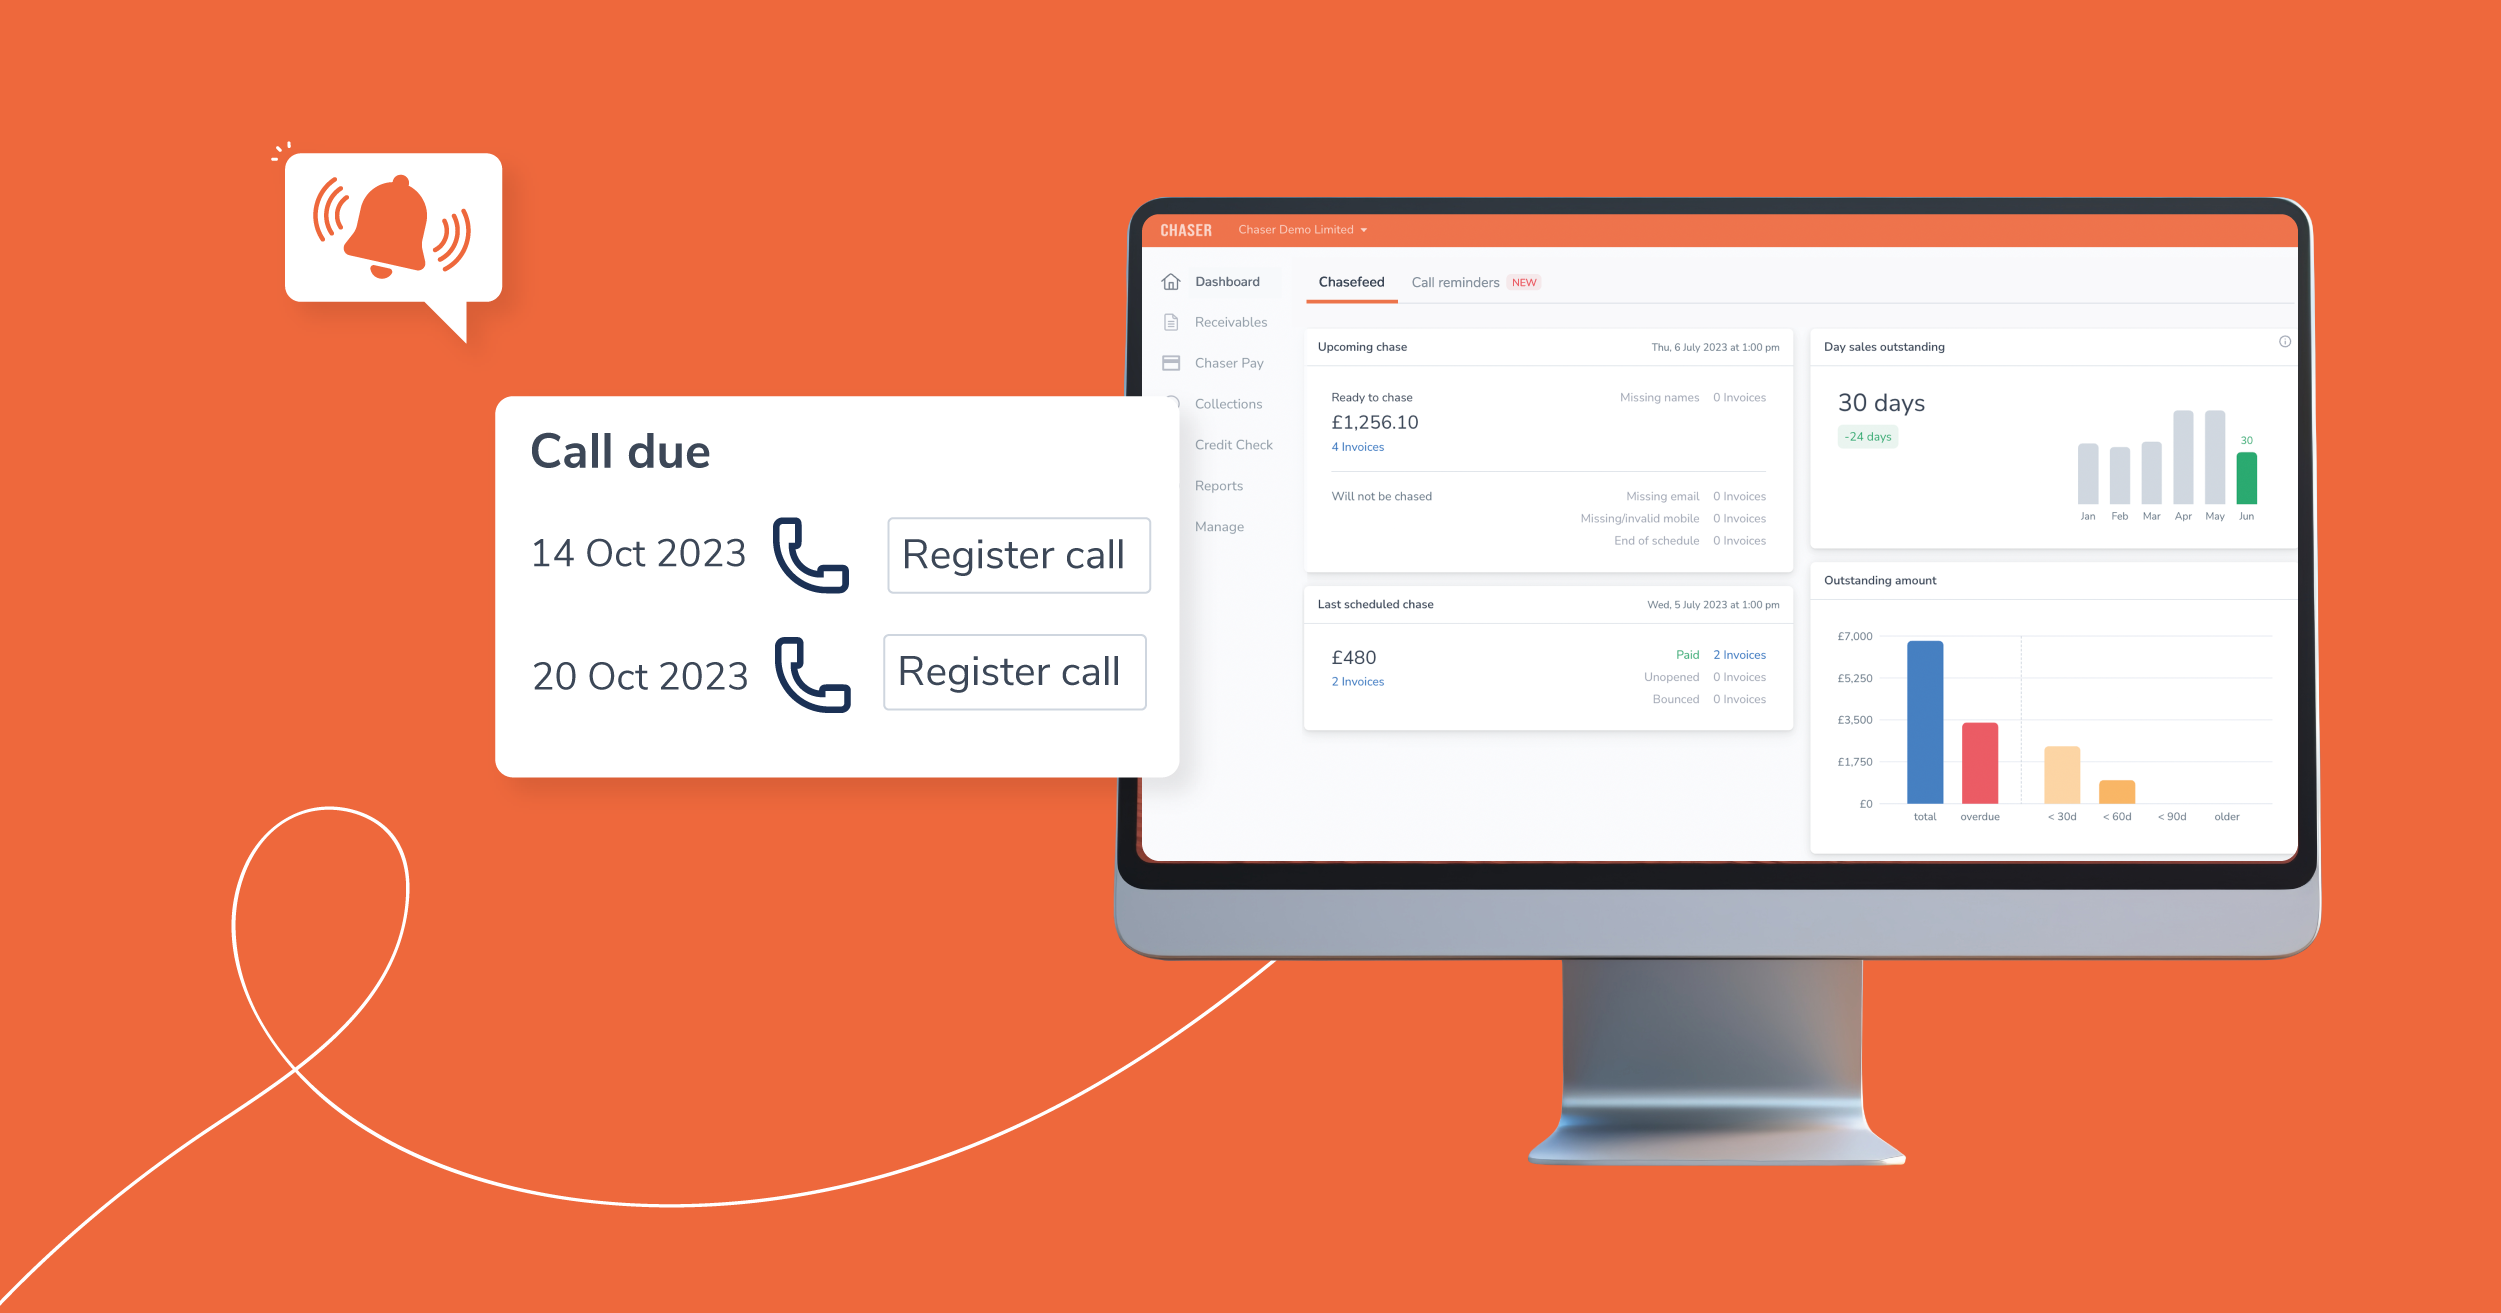 Reduce late payments with automated call reminders in Chaser